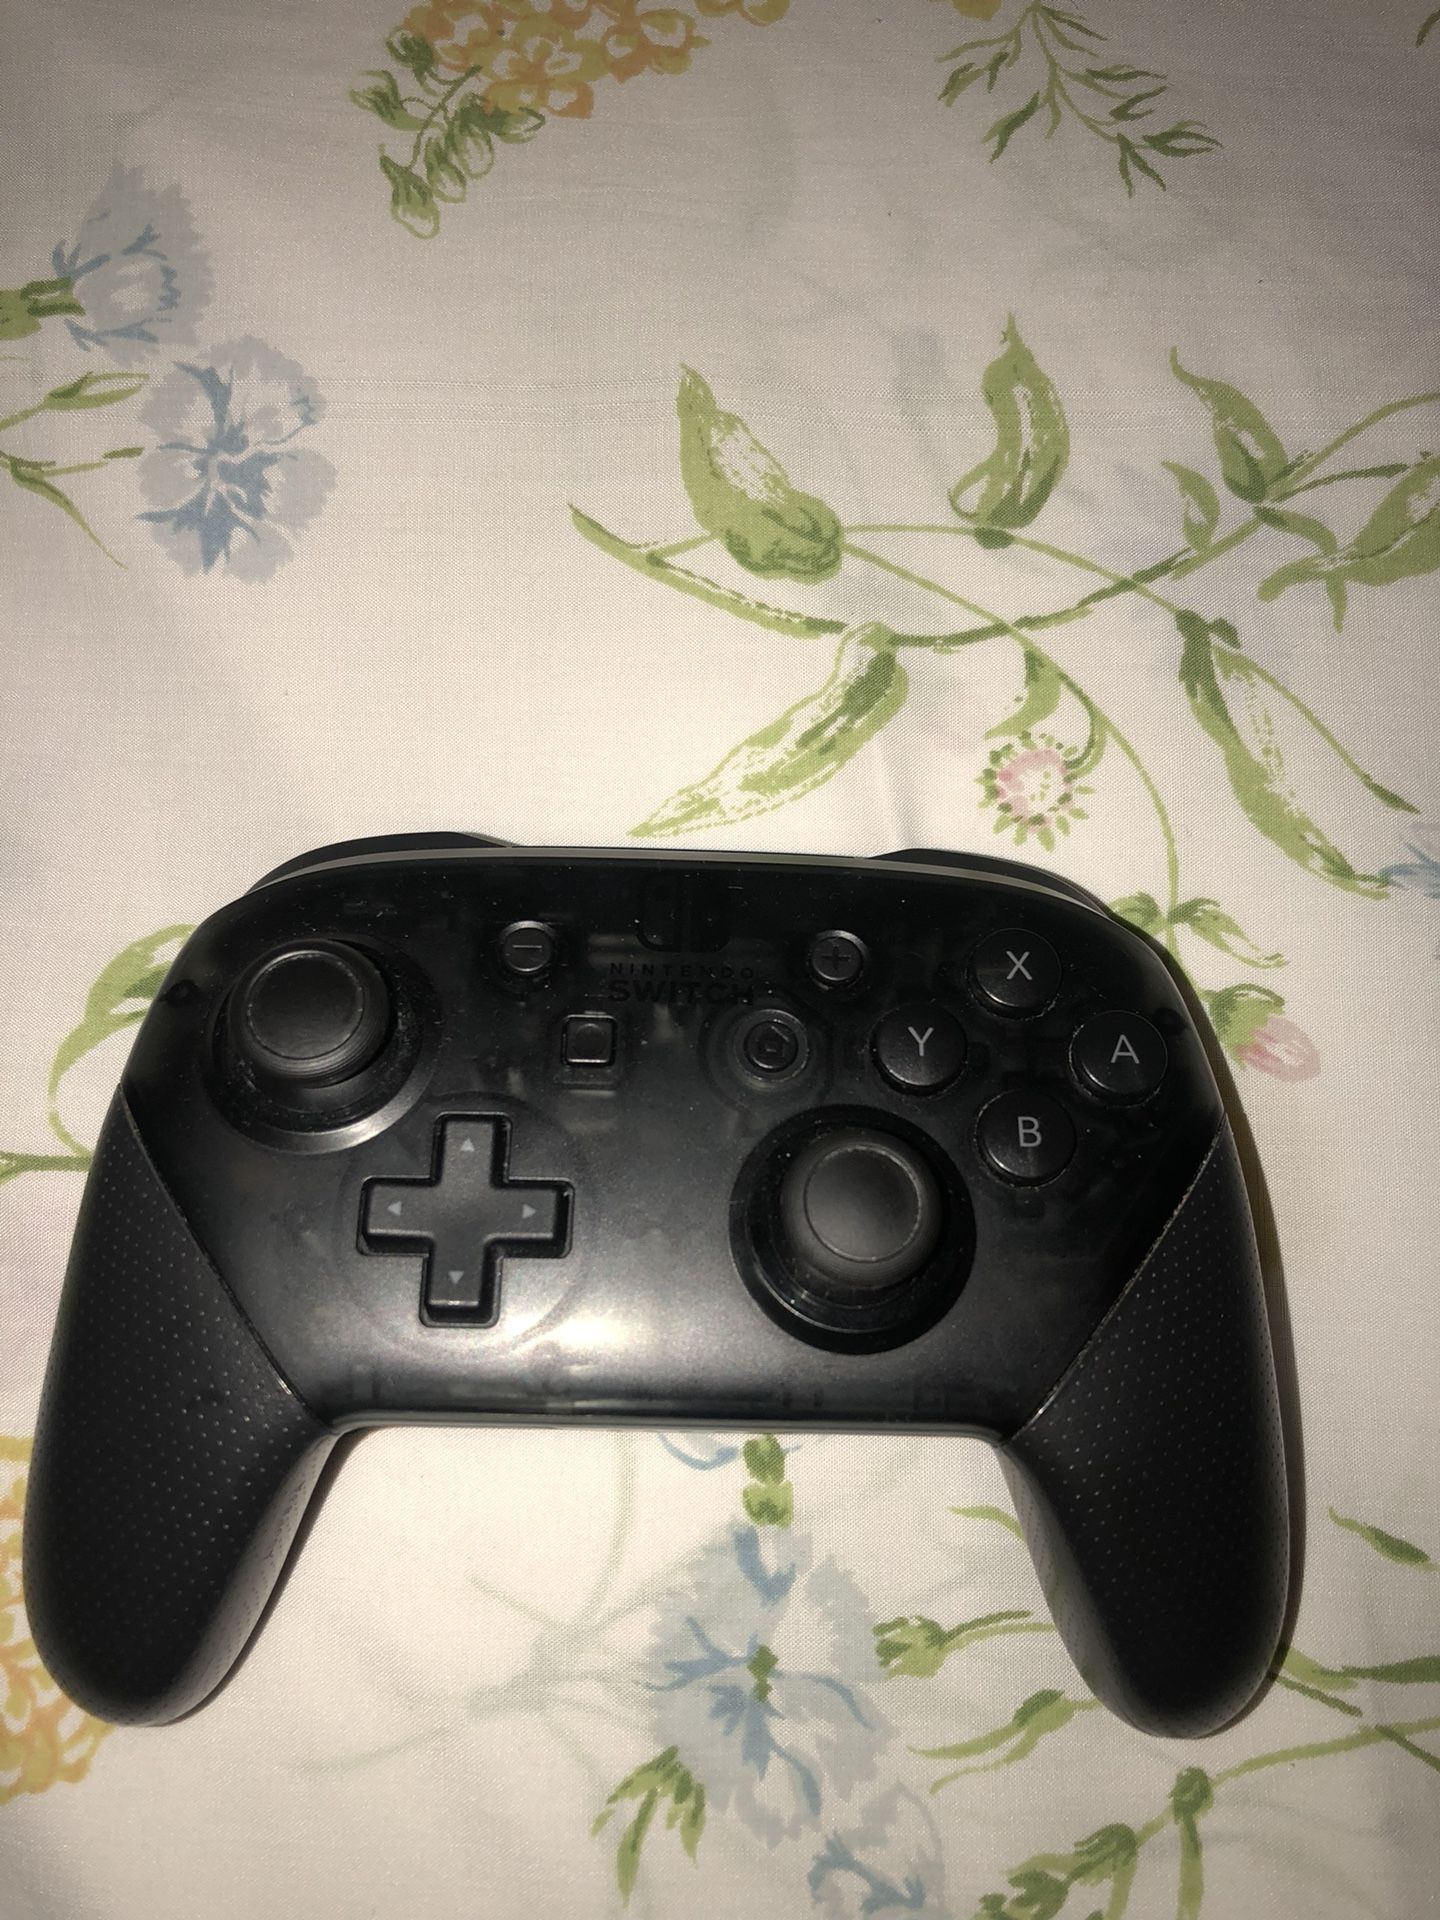 Nintendo switch pro controller almost new